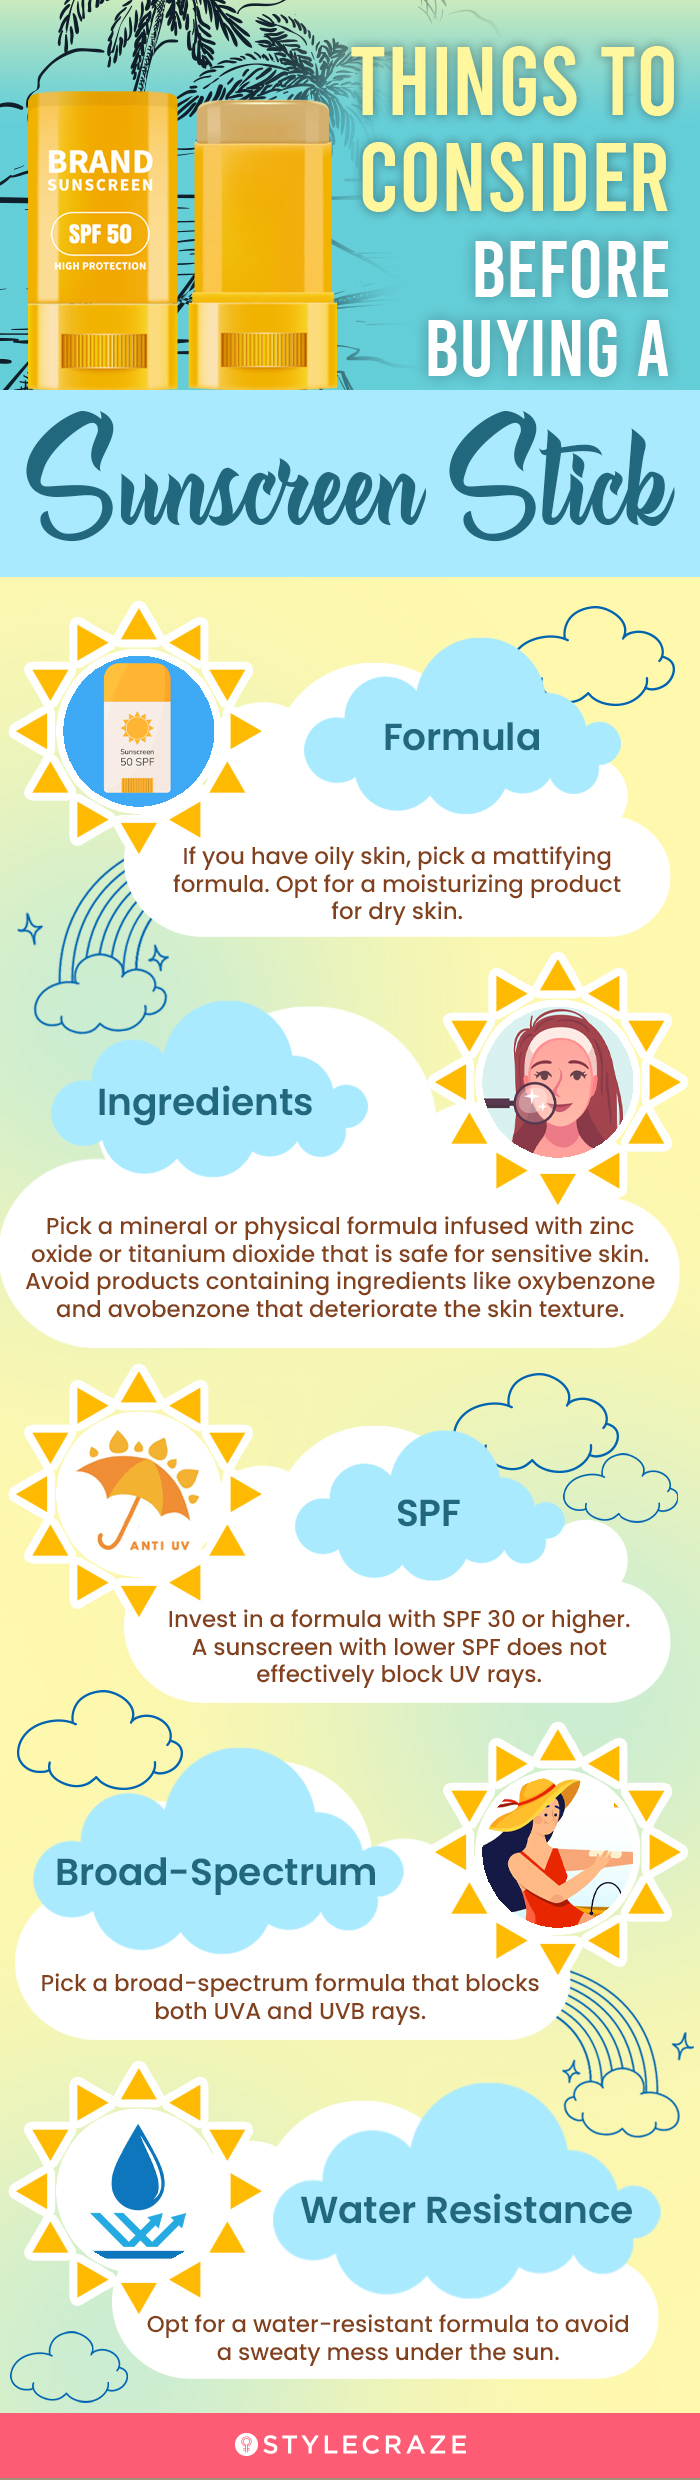 Things To Consider Before Buying A Sunscreen Stick (infographic)